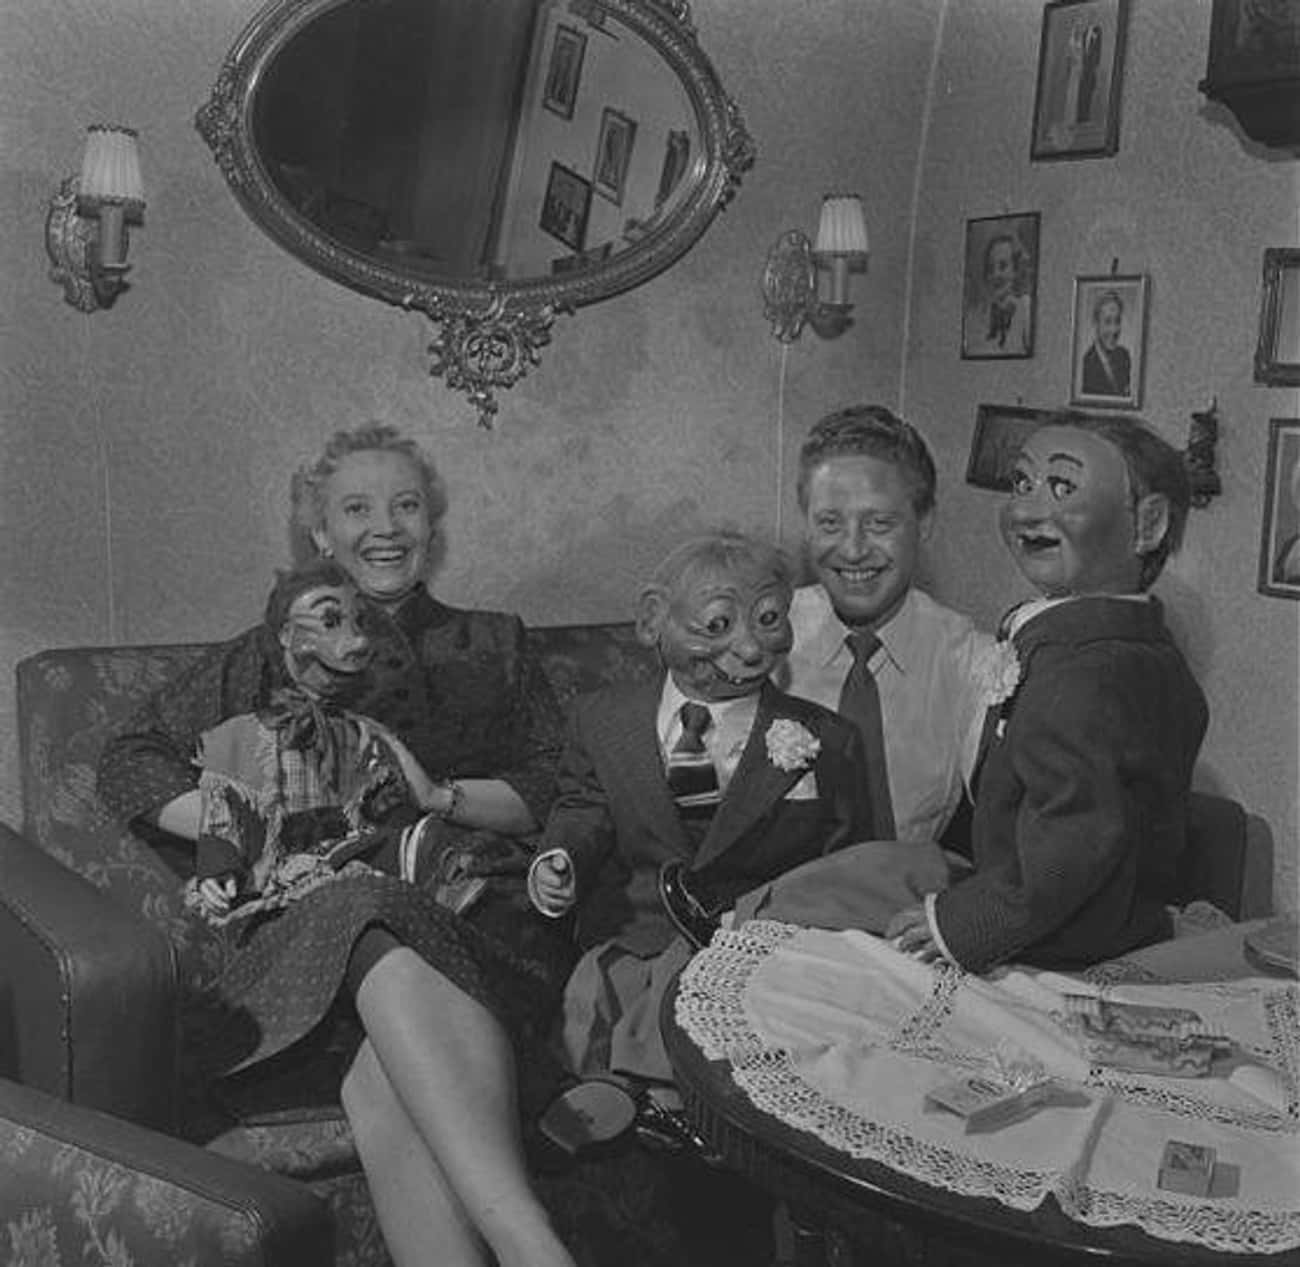 Norwegian Ventriloquists And Their Dummies (1954)